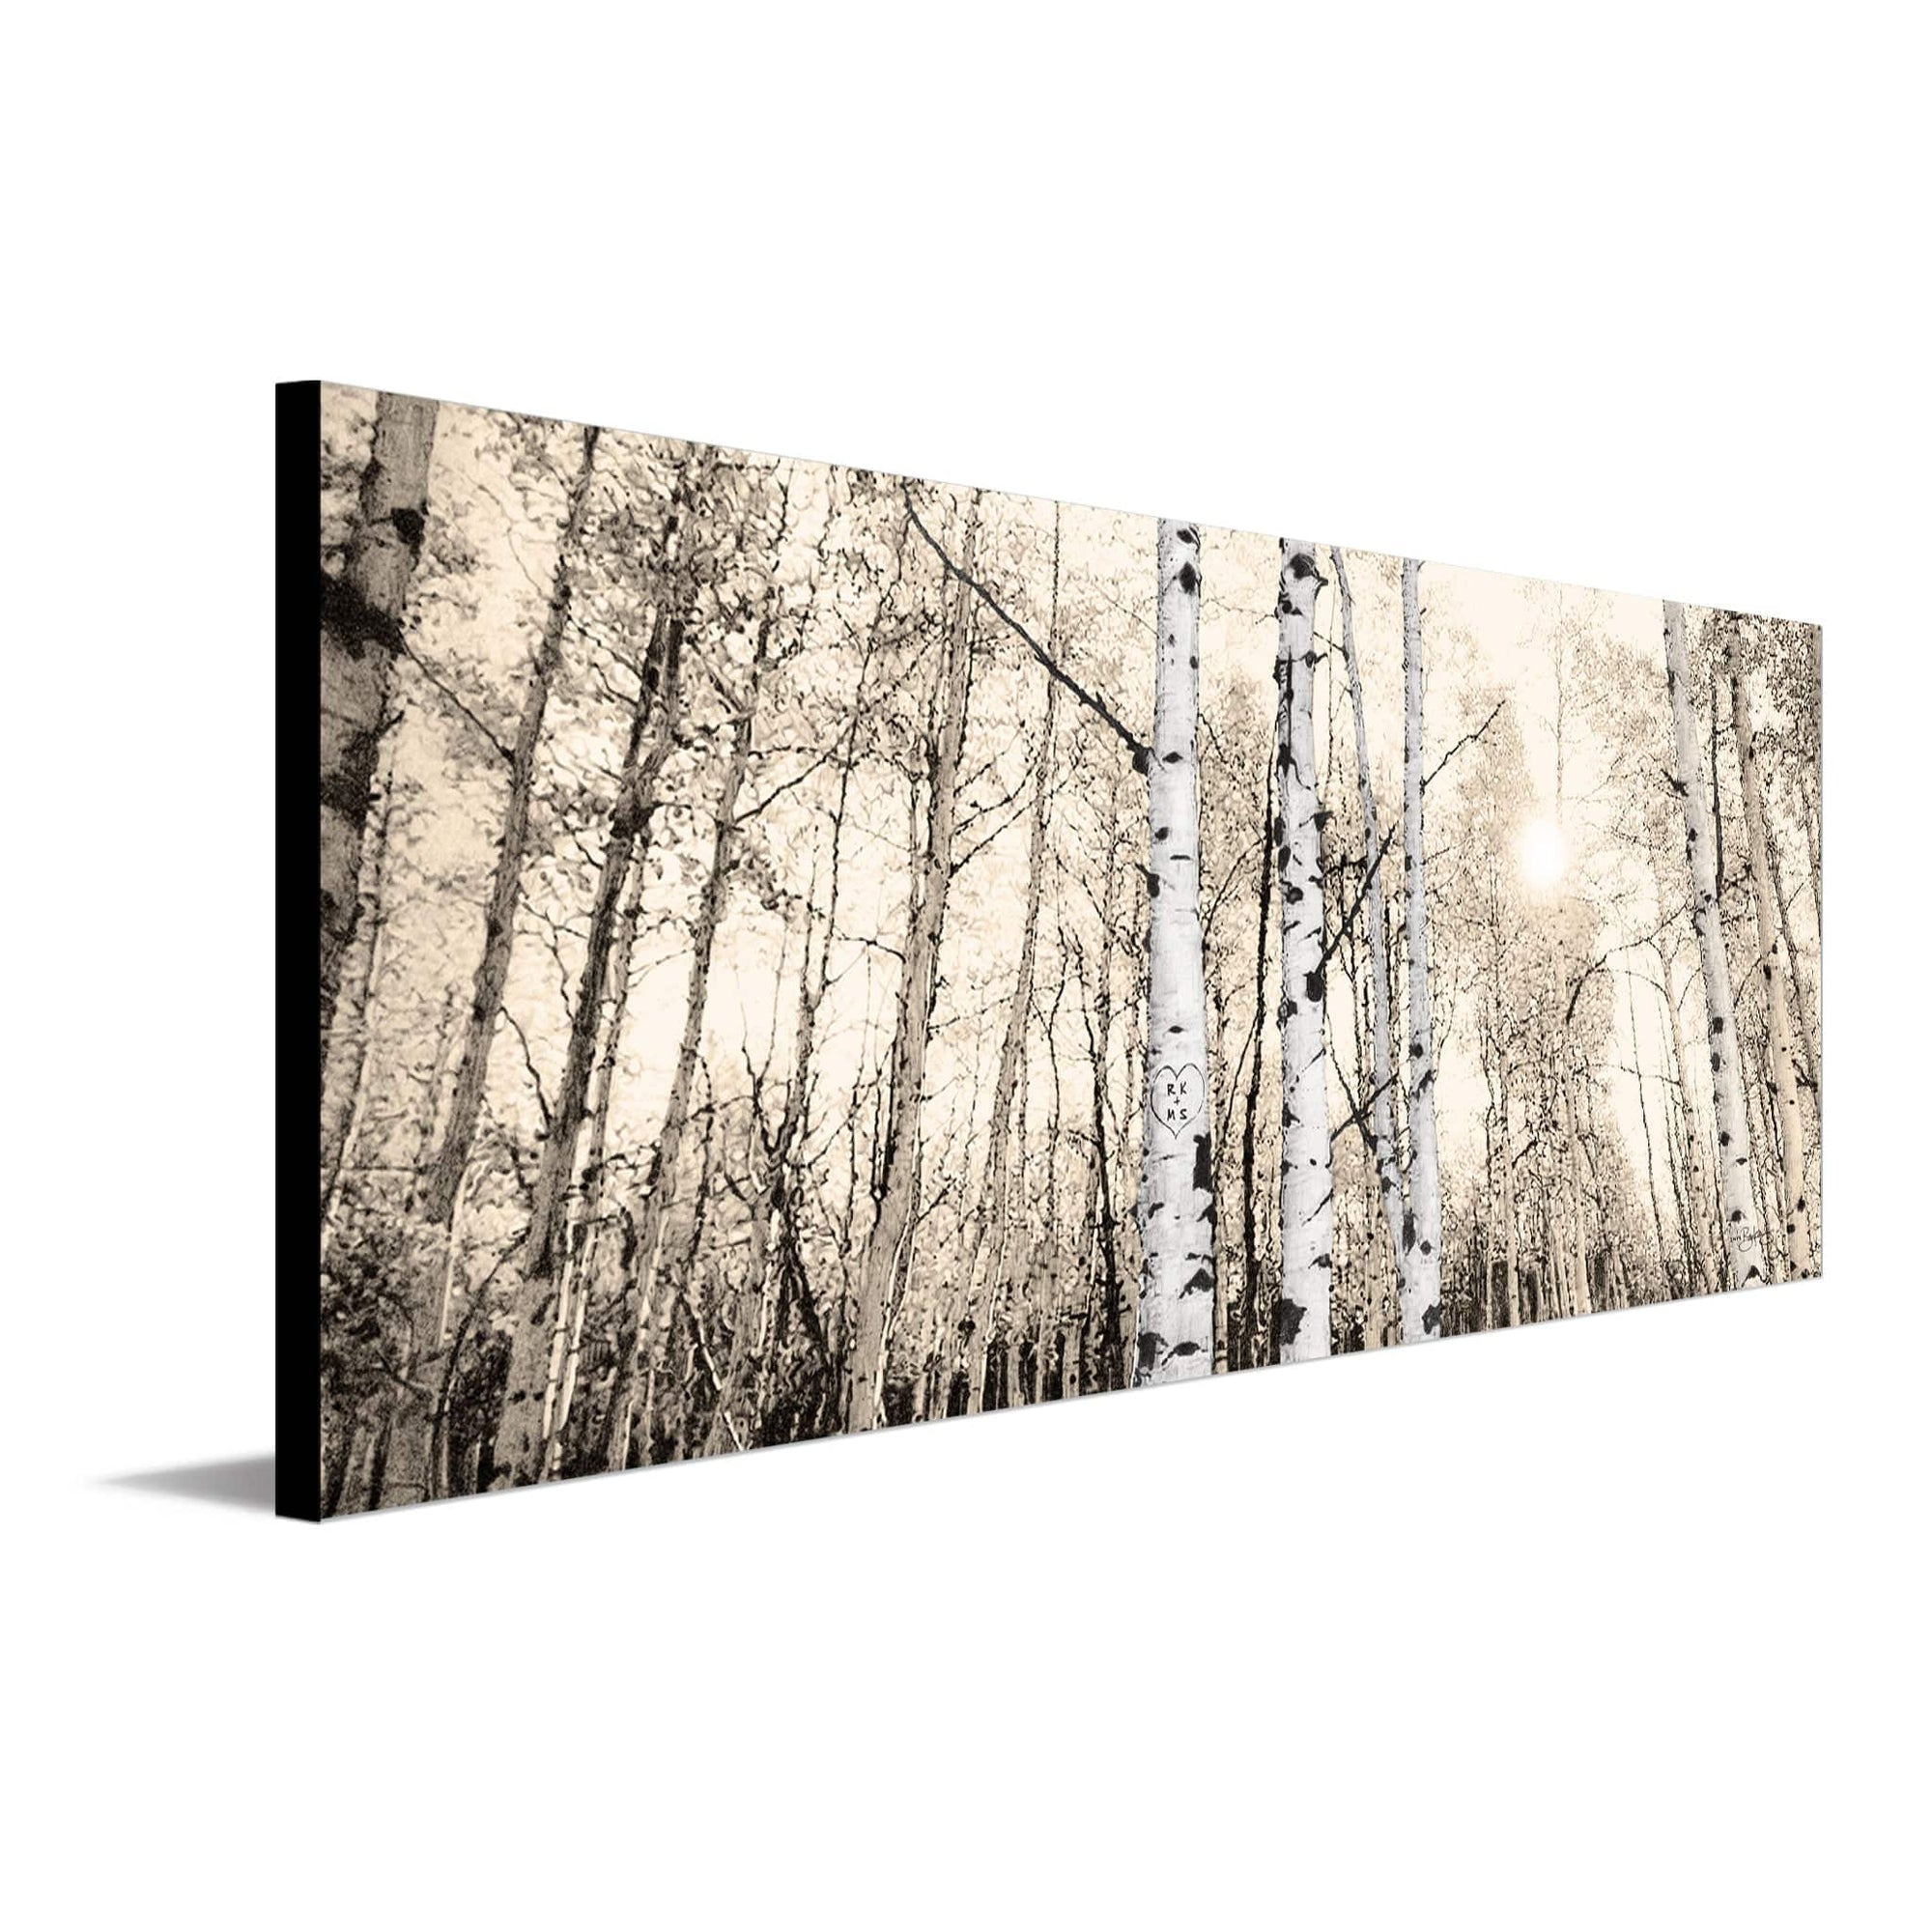 Black and white aspen tree art drawing from Personal-Prints